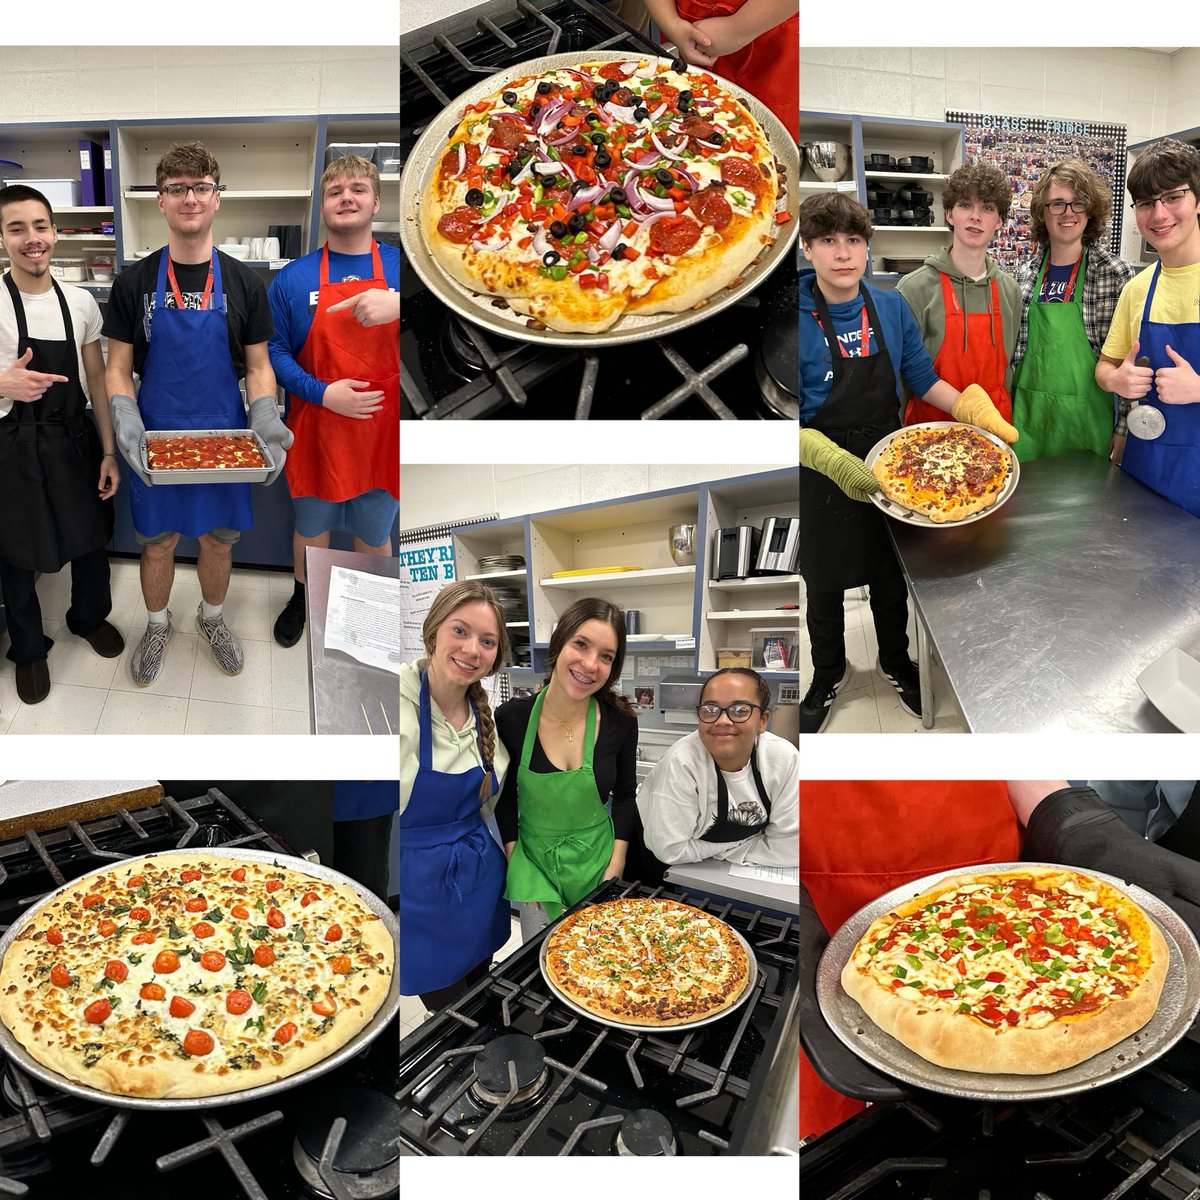 Some of the delicious pizzas made by culinary 2 students for their pizza cook-off today 🍕They’re done with yeast breads for the semester and now it’s time to learn about pies & pastries! #Empower95